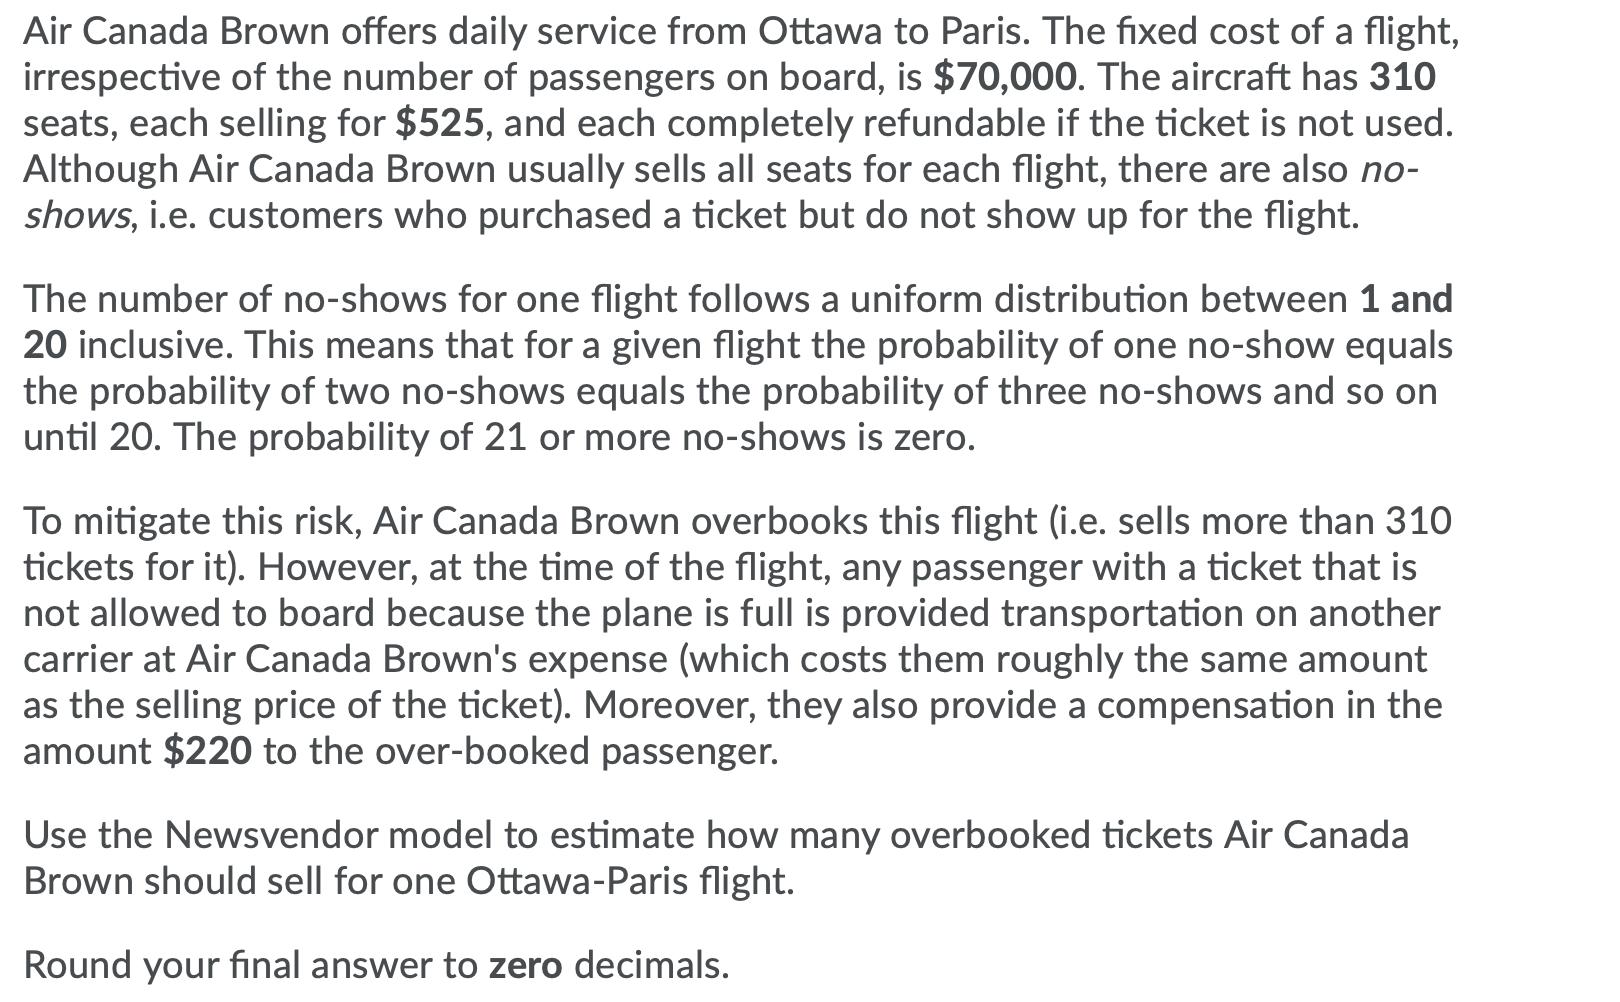 Air Canada Brown offers daily service from Ottawa to Paris. The fixed cost of a flight, irrespective of the